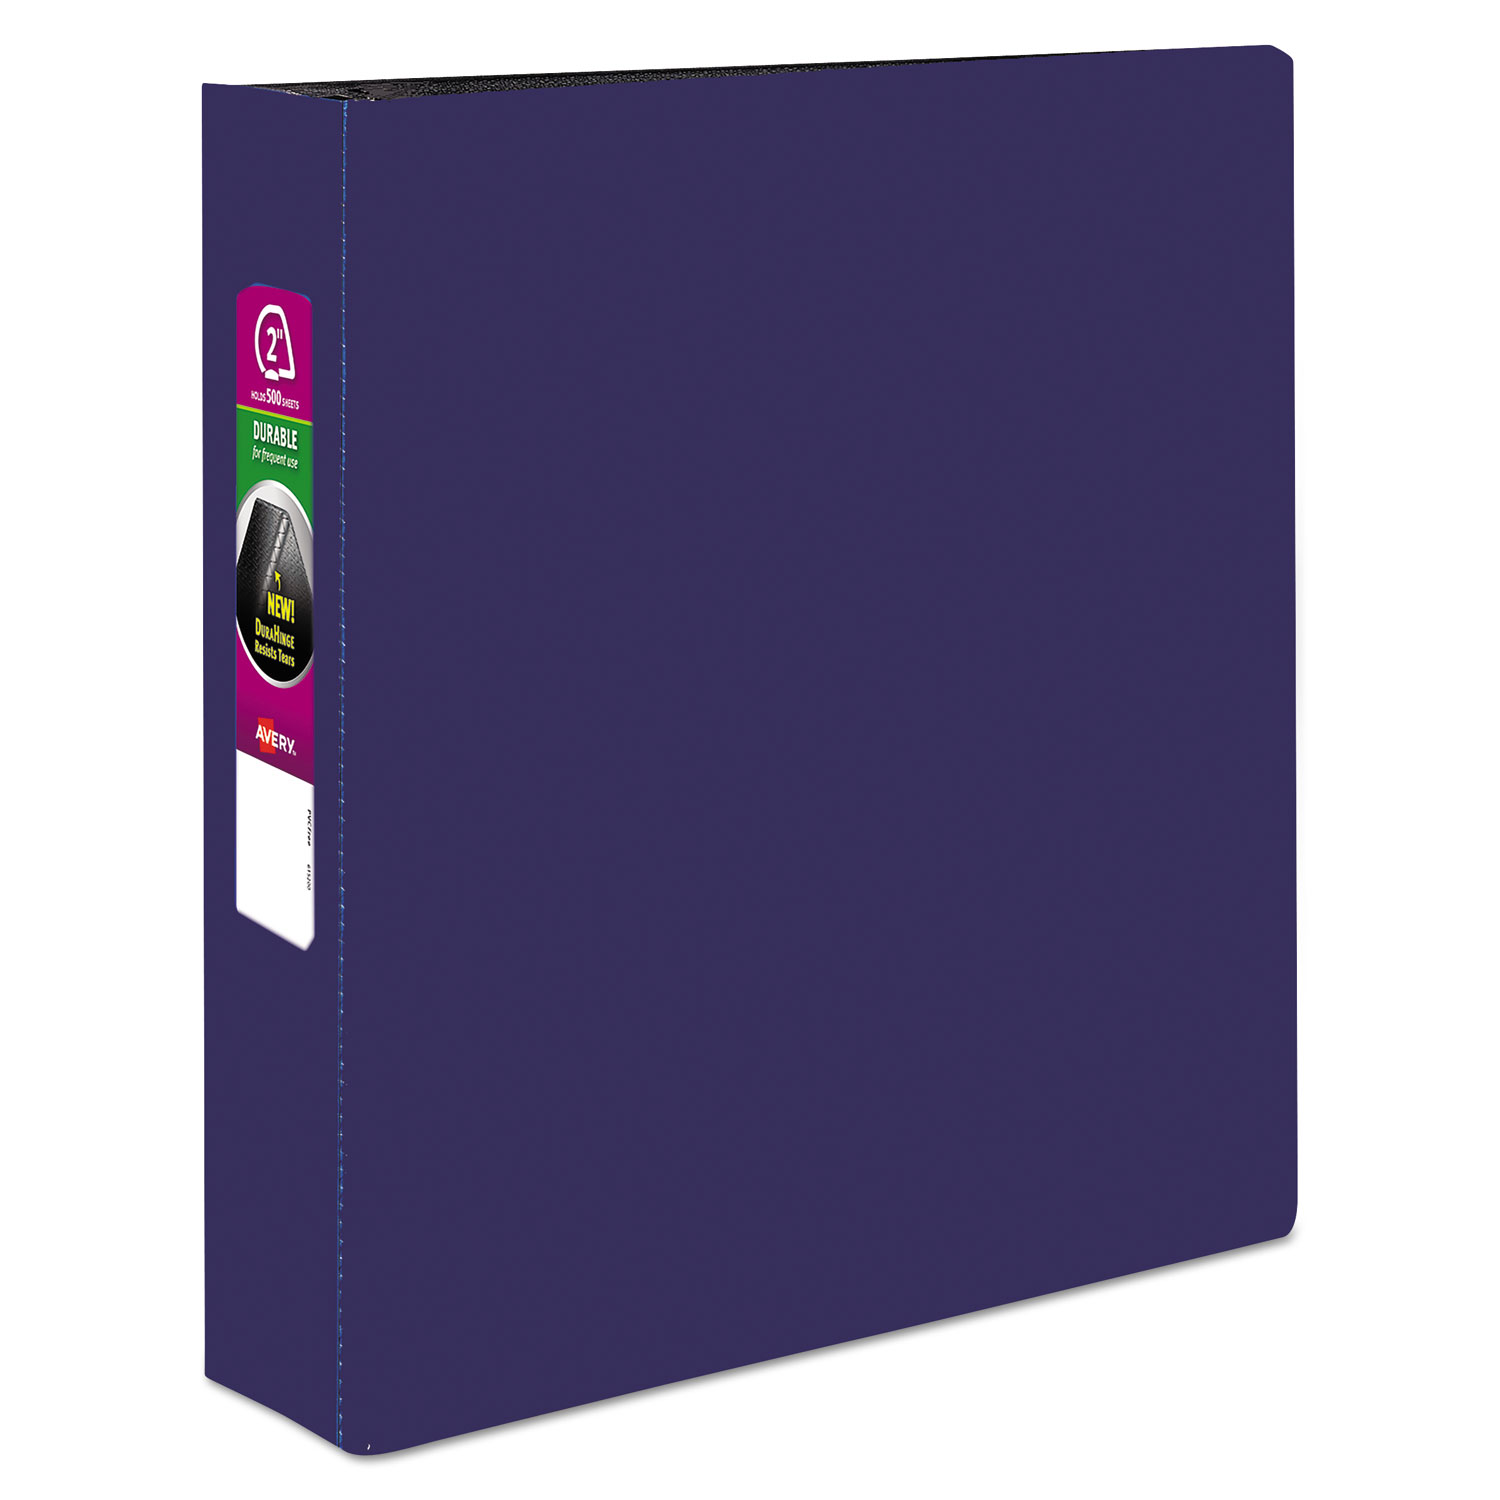  Avery 27551 Durable Non-View Binder with DuraHinge and Slant Rings, 3 Rings, 2 Capacity, 11 x 8.5, Blue (AVE27551) 